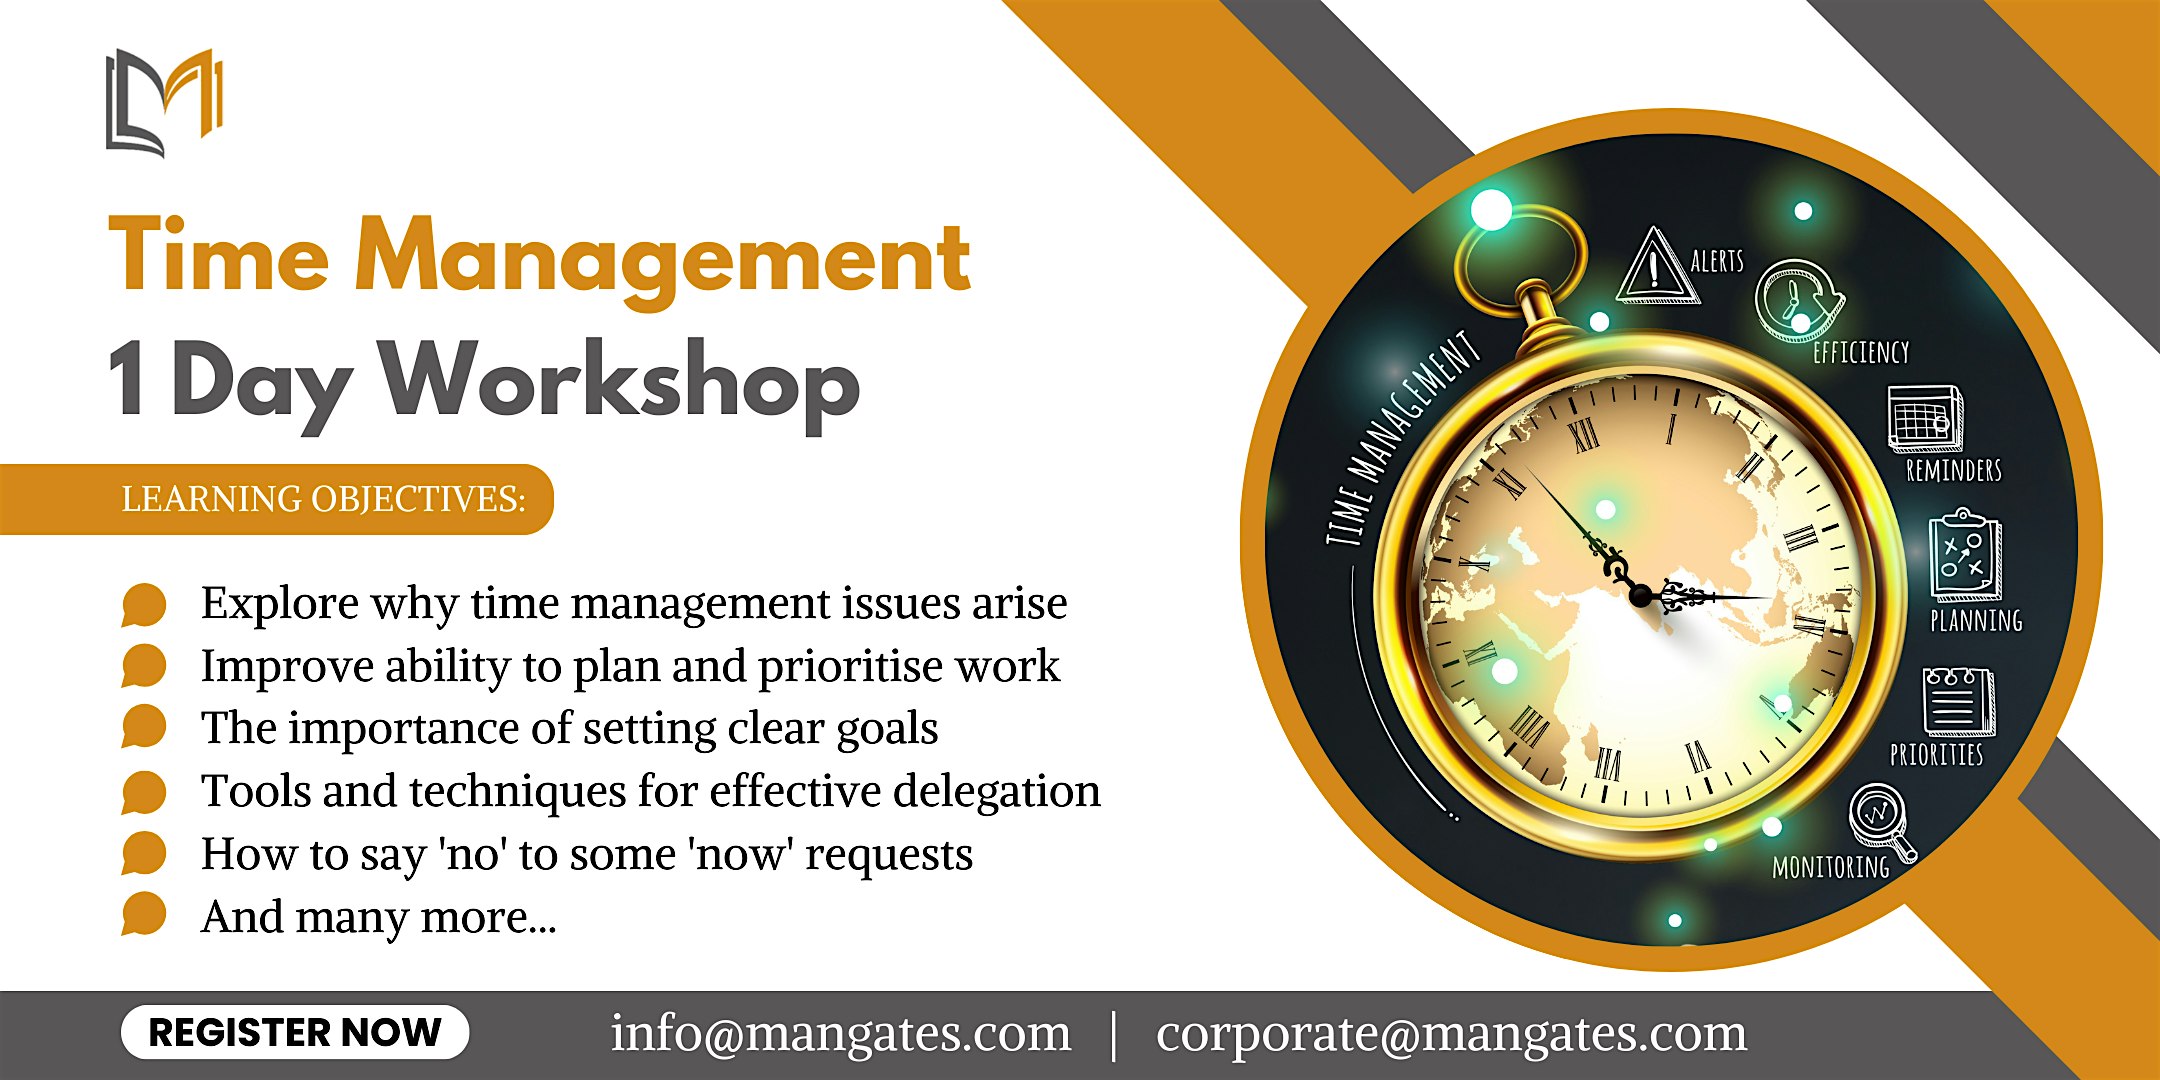 Time Management Mastery 1 Day Workshop in Cape Coral, FL